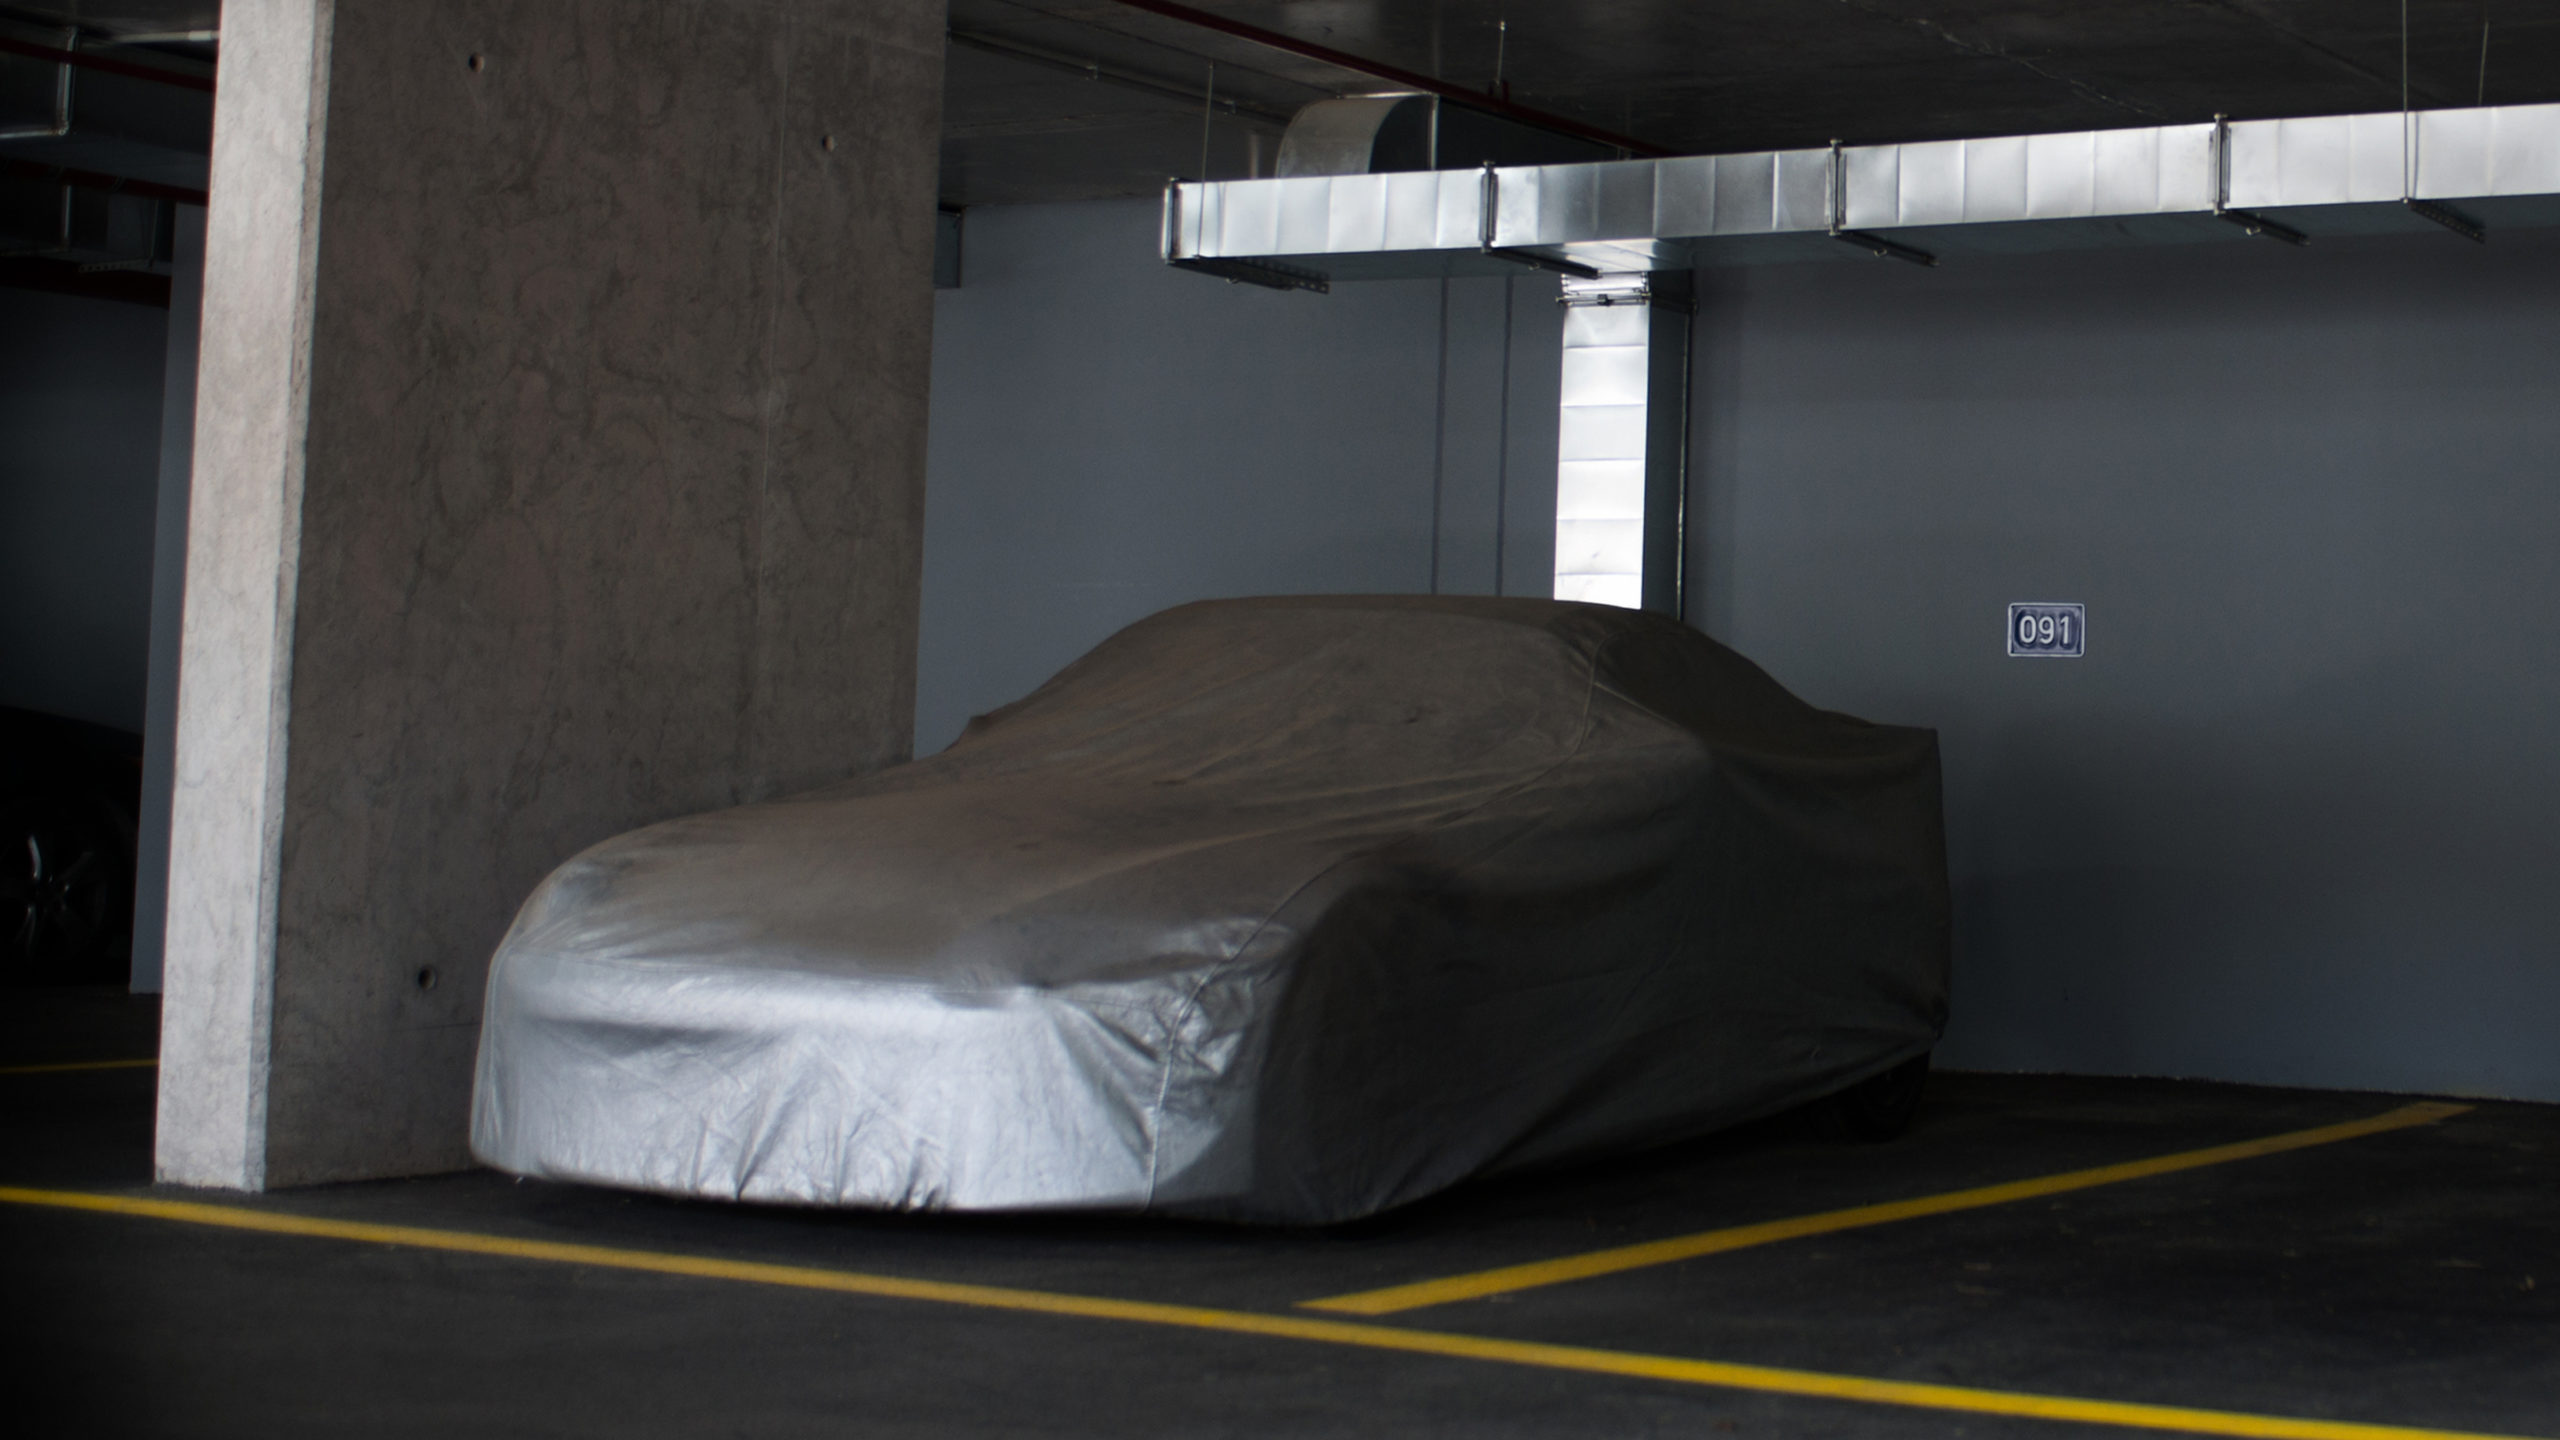 The Best Car Cover to Protect Your Vehicle 2021 - TrueCar Blog